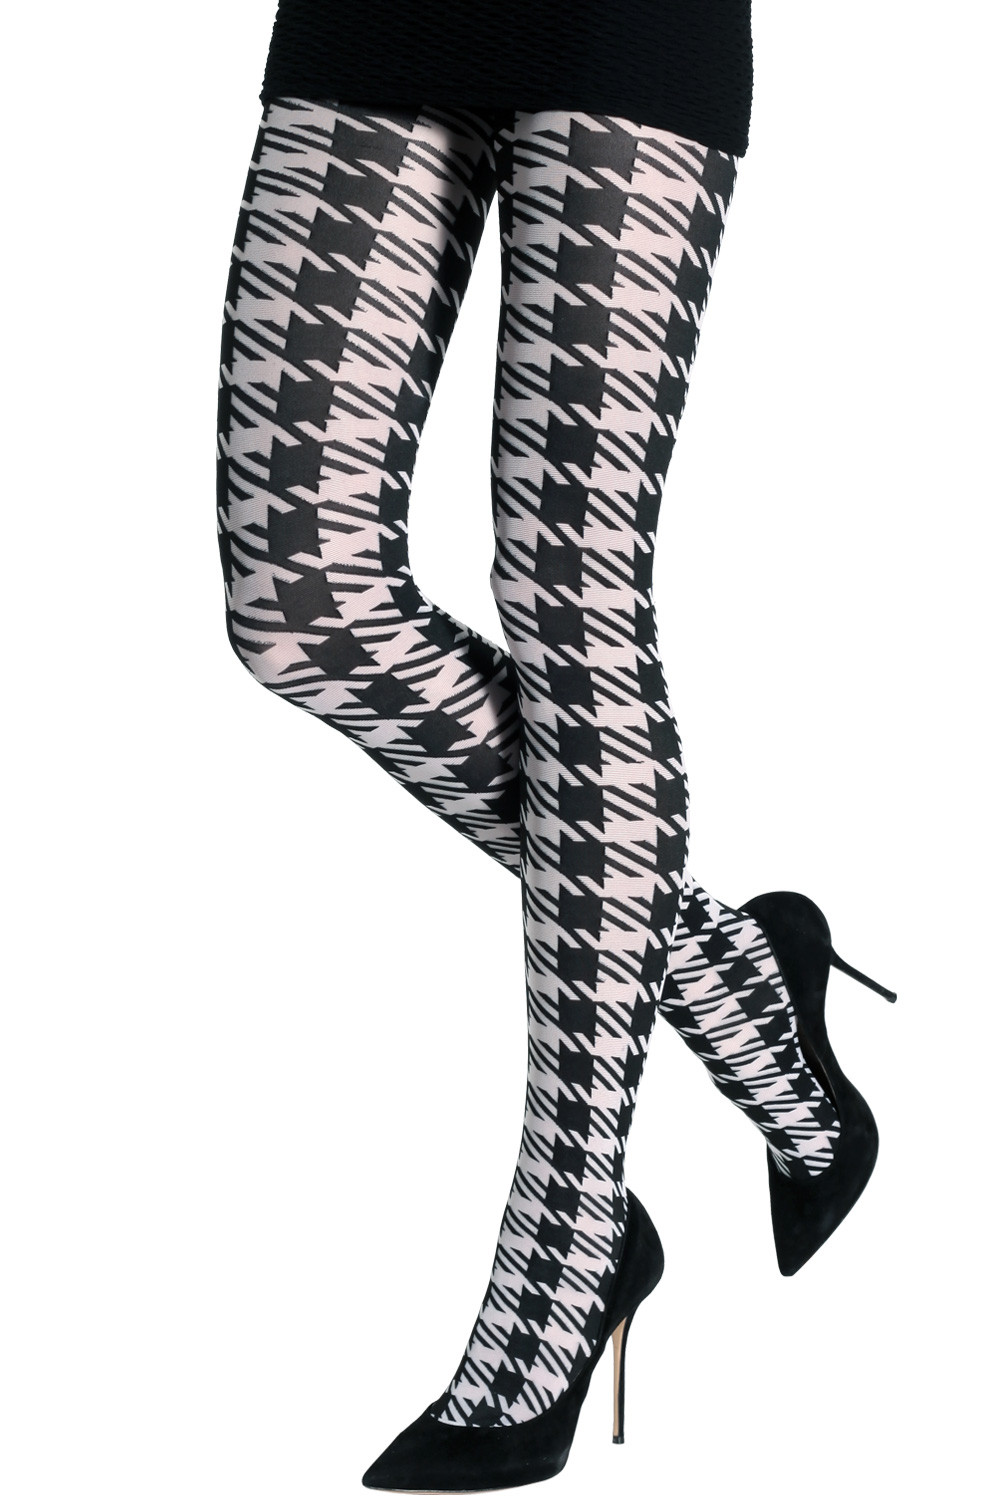 Brushed Soft Black and White Houndstooth Stripe Leggings S/M